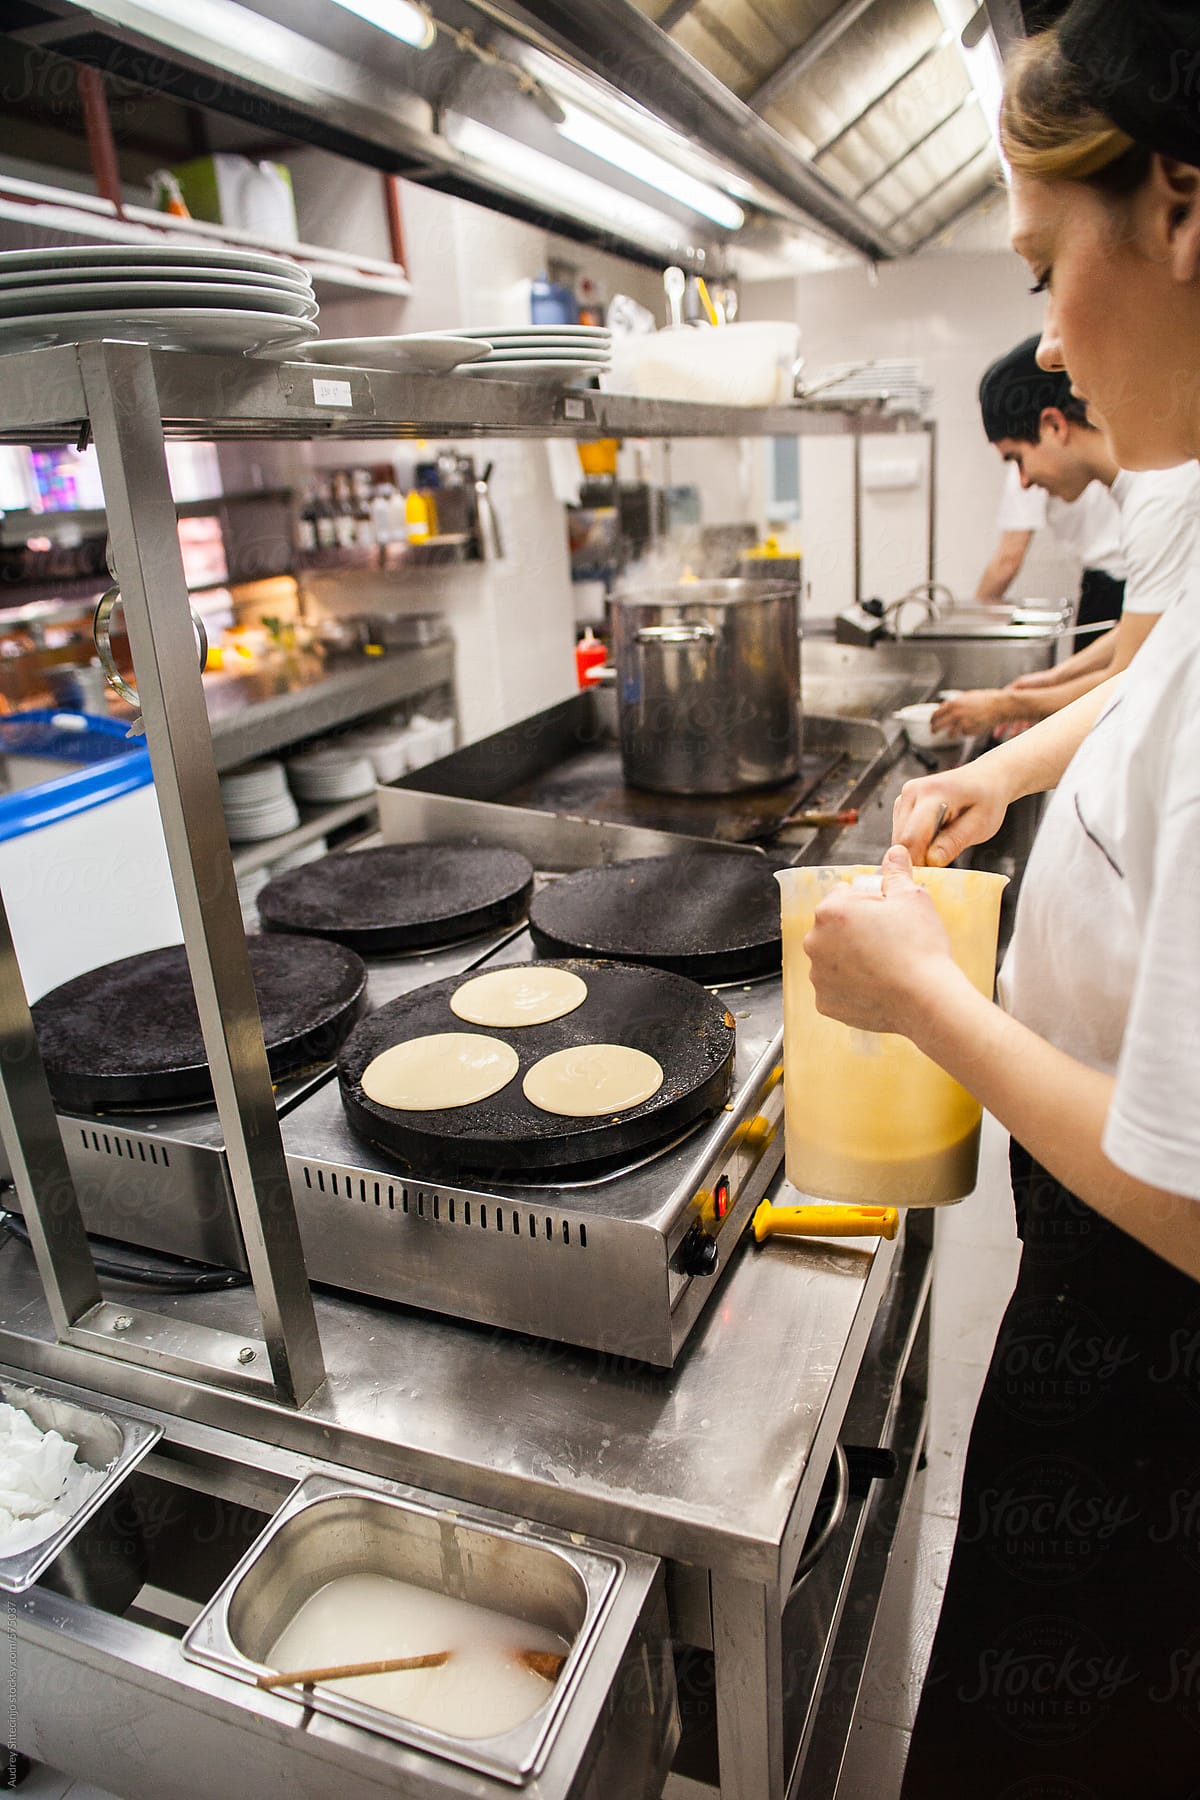 Team of chefs preparing food in a commercial kitchen.